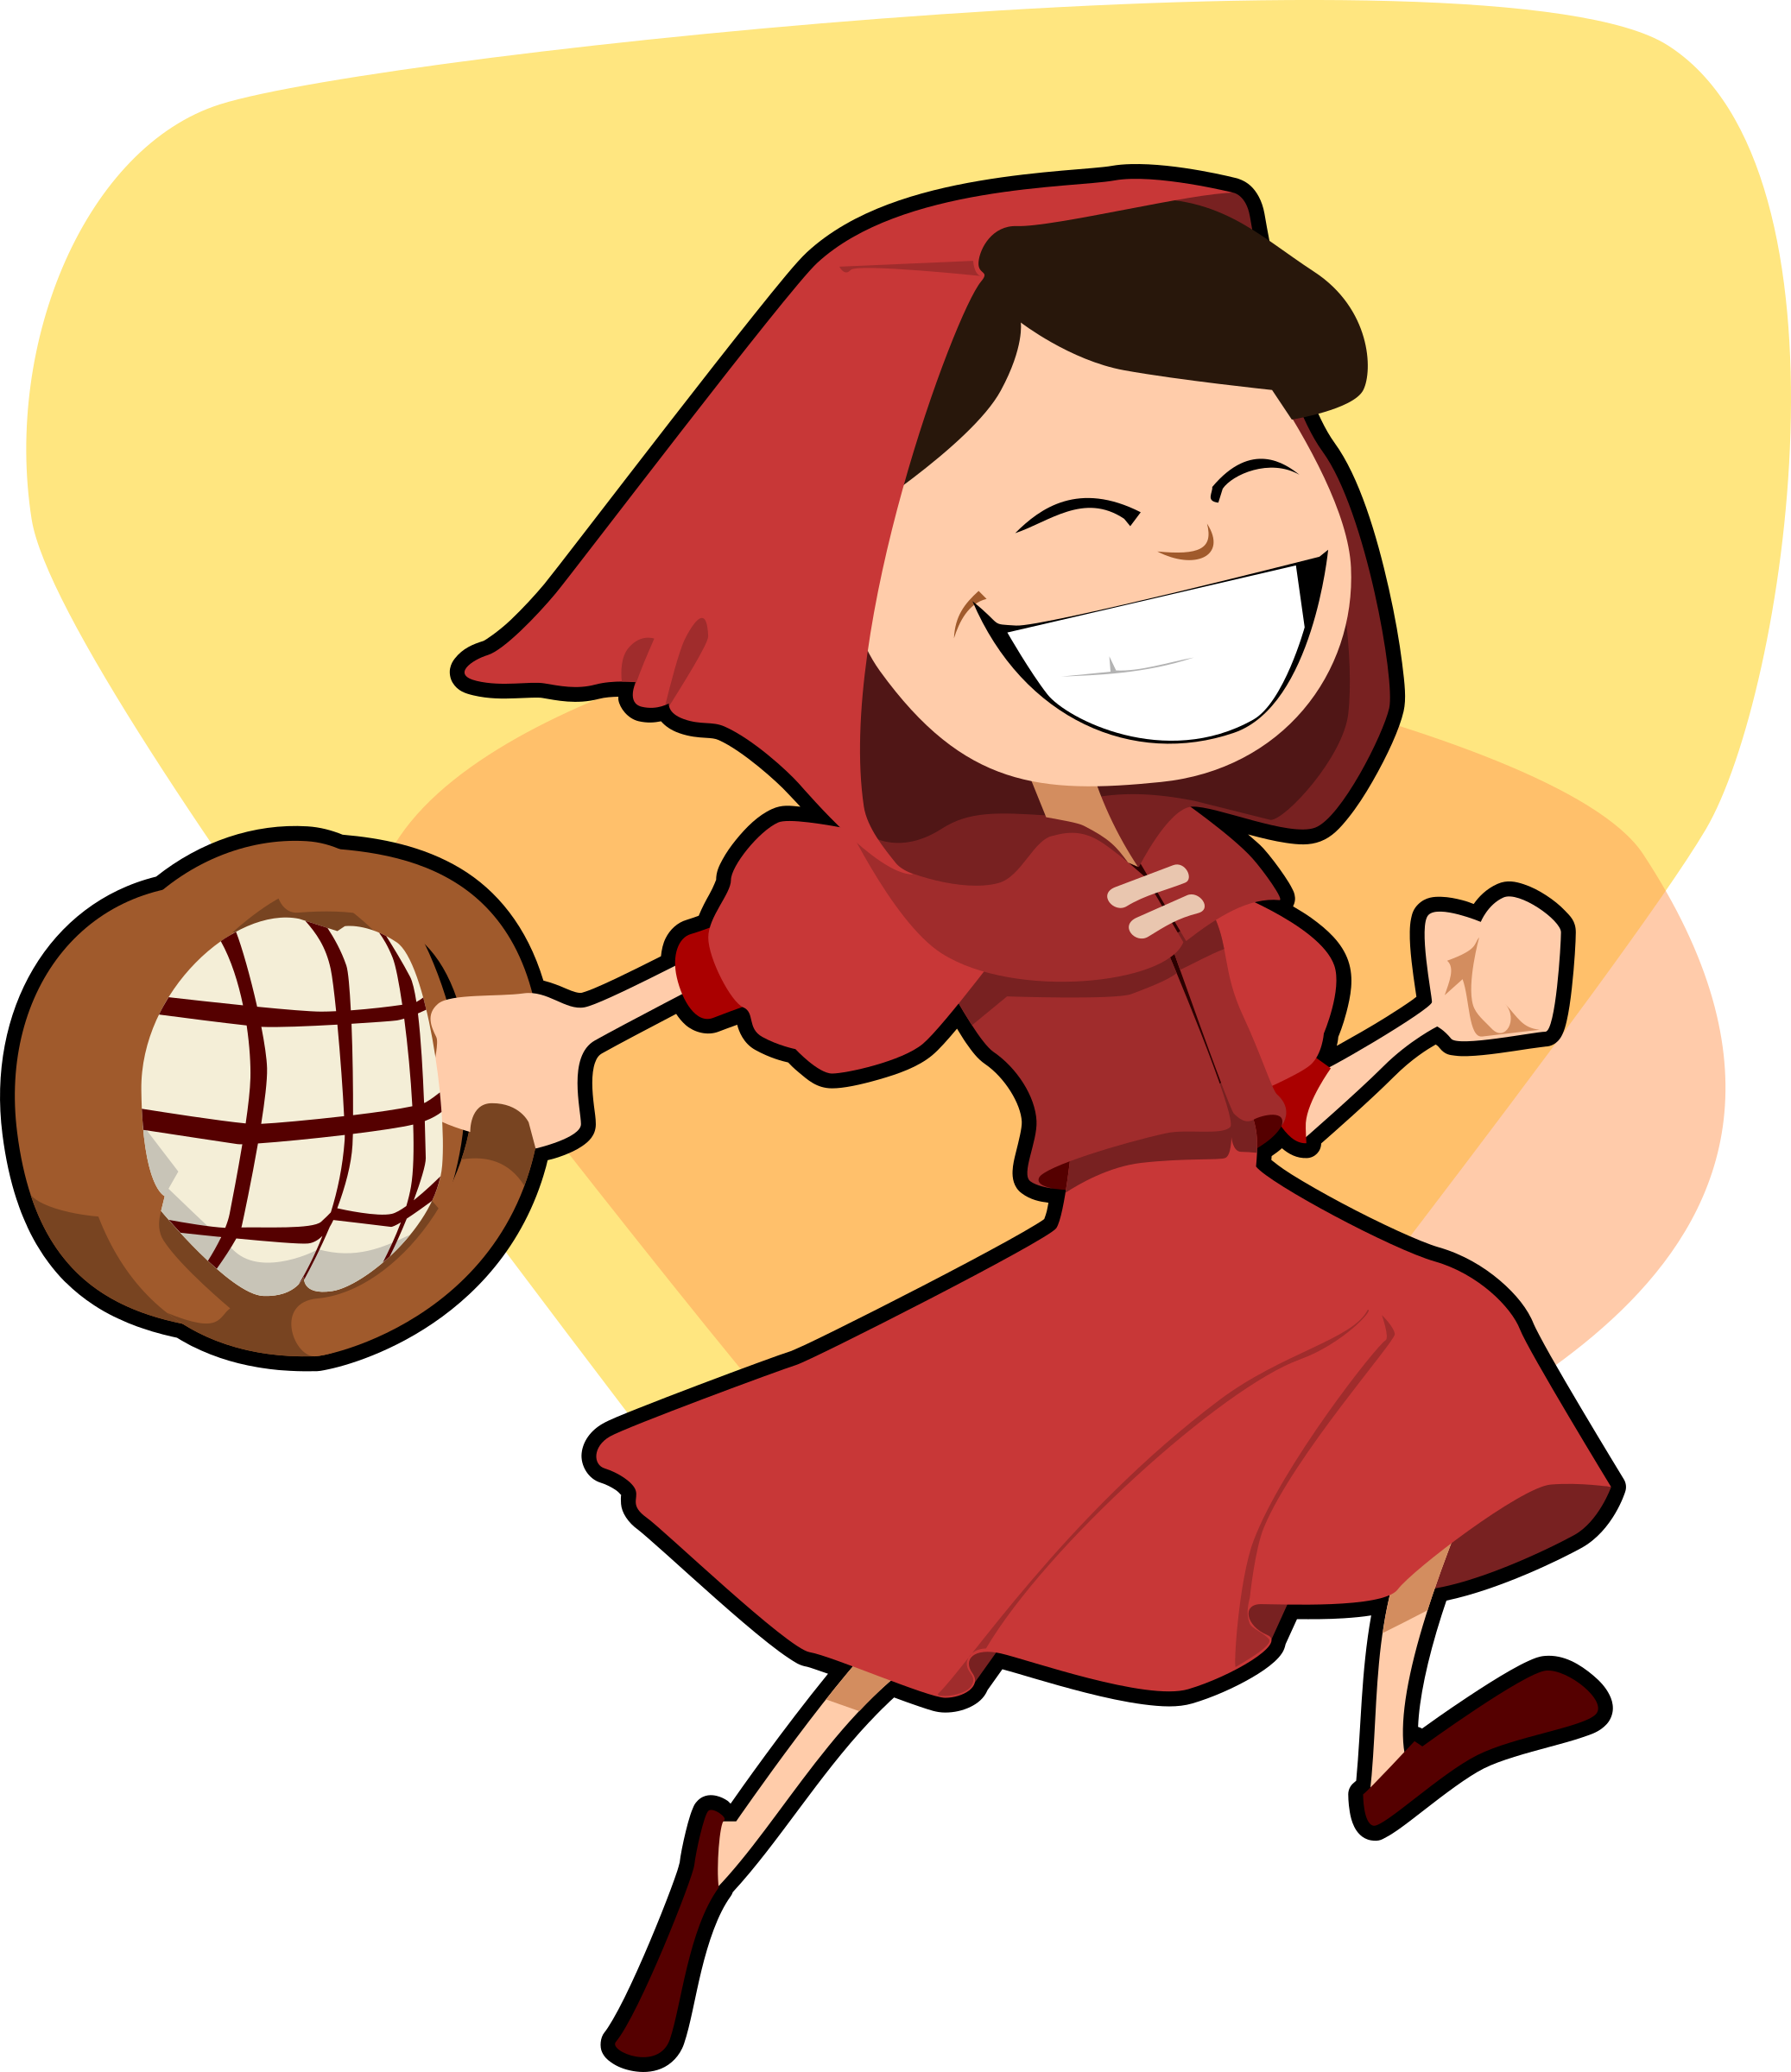 Big Image - Little Red Riding Hood Happy (2074x2400)